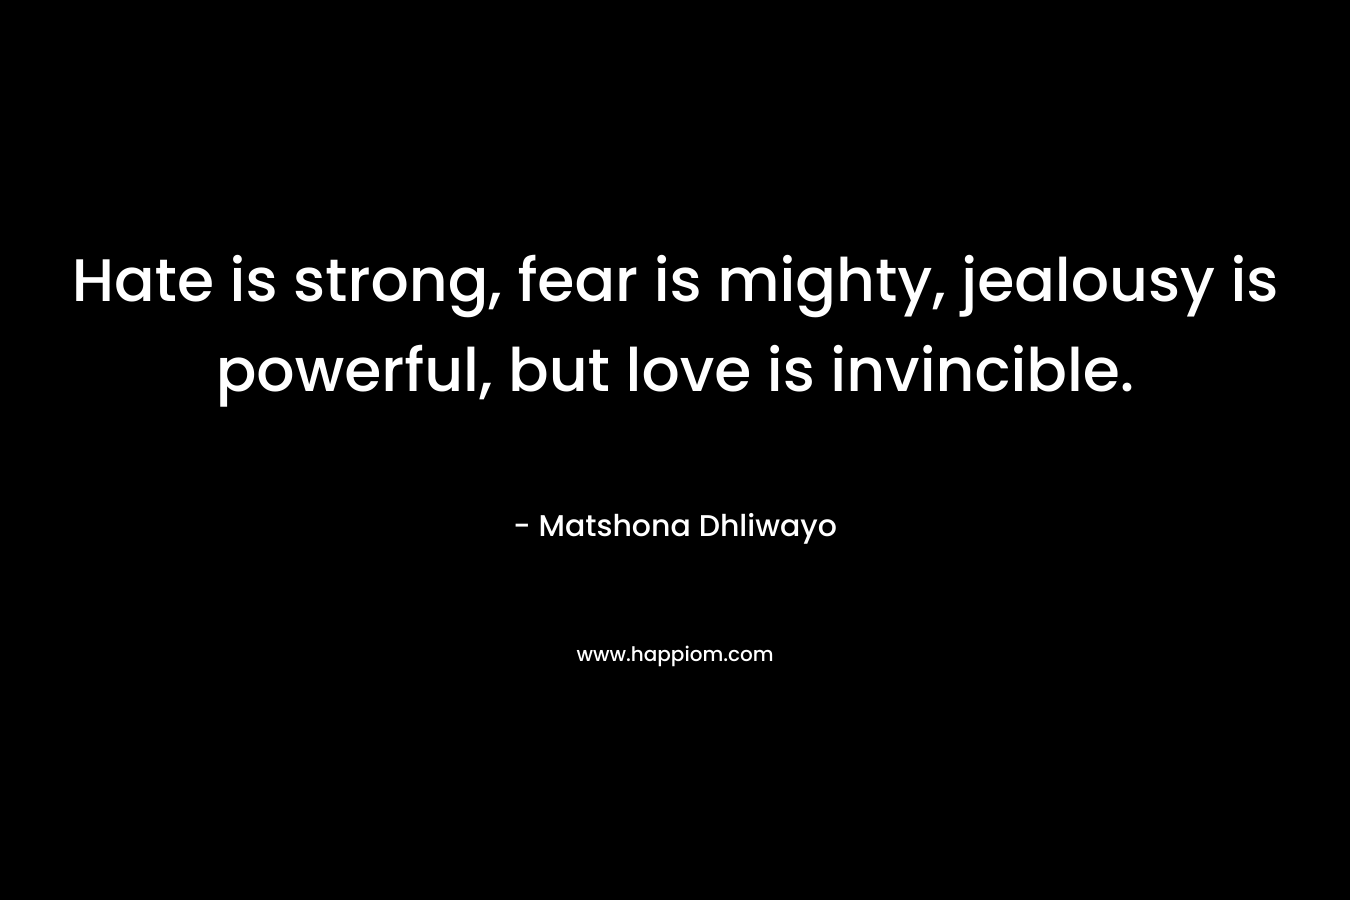 Hate is strong, fear is mighty, jealousy is powerful, but love is invincible.